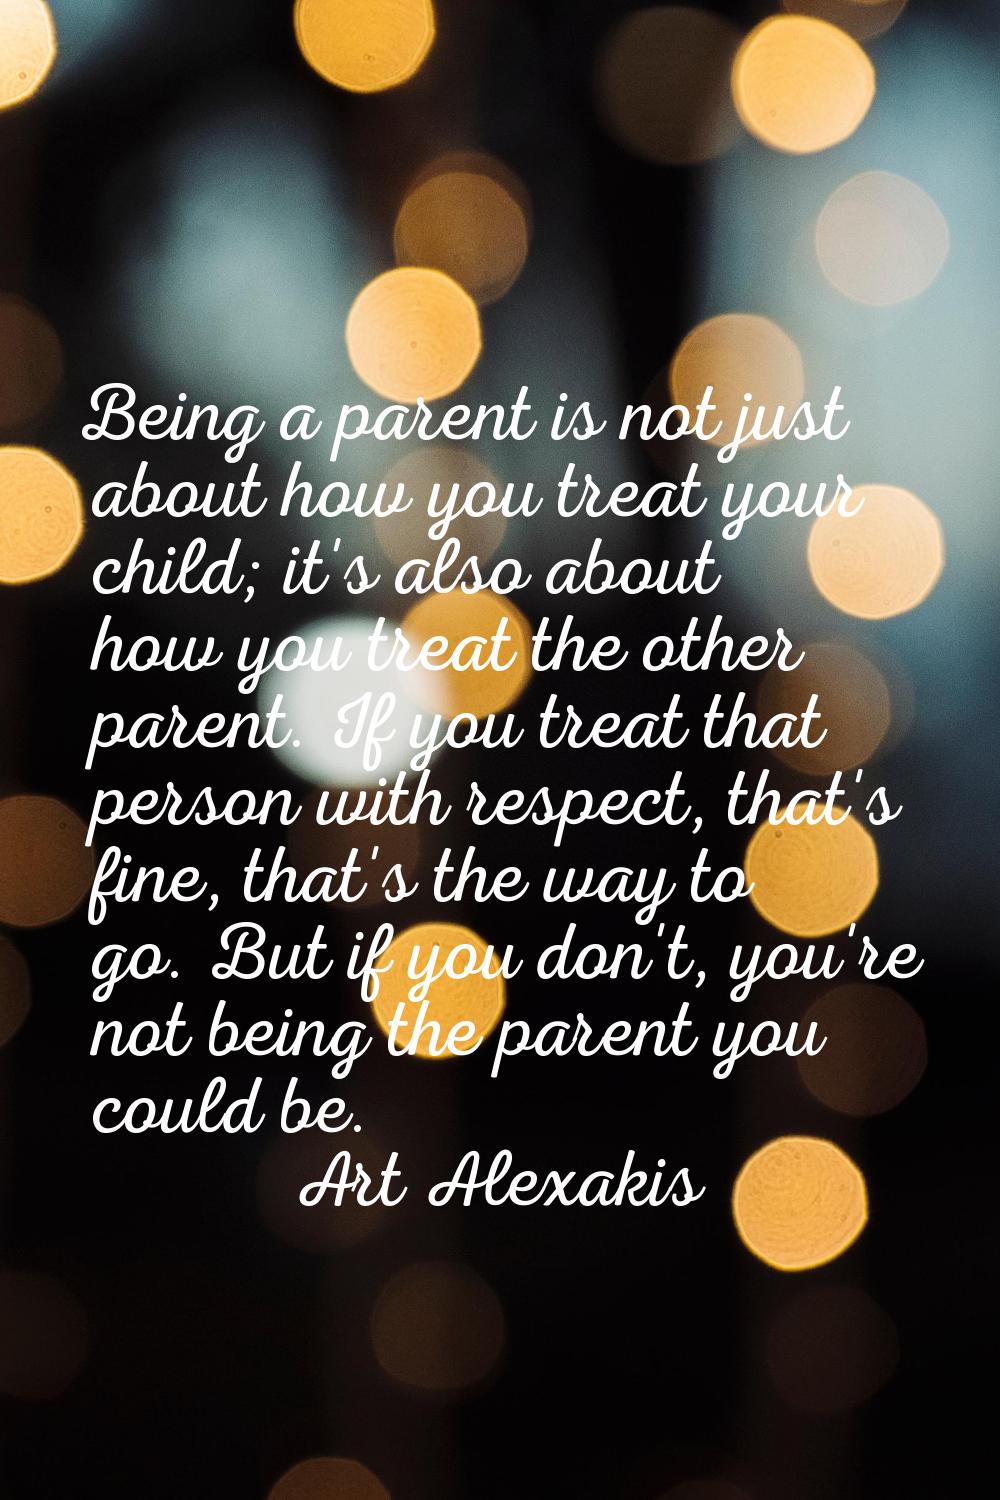 Being a parent is not just about how you treat your child; it's also about how you treat the other 